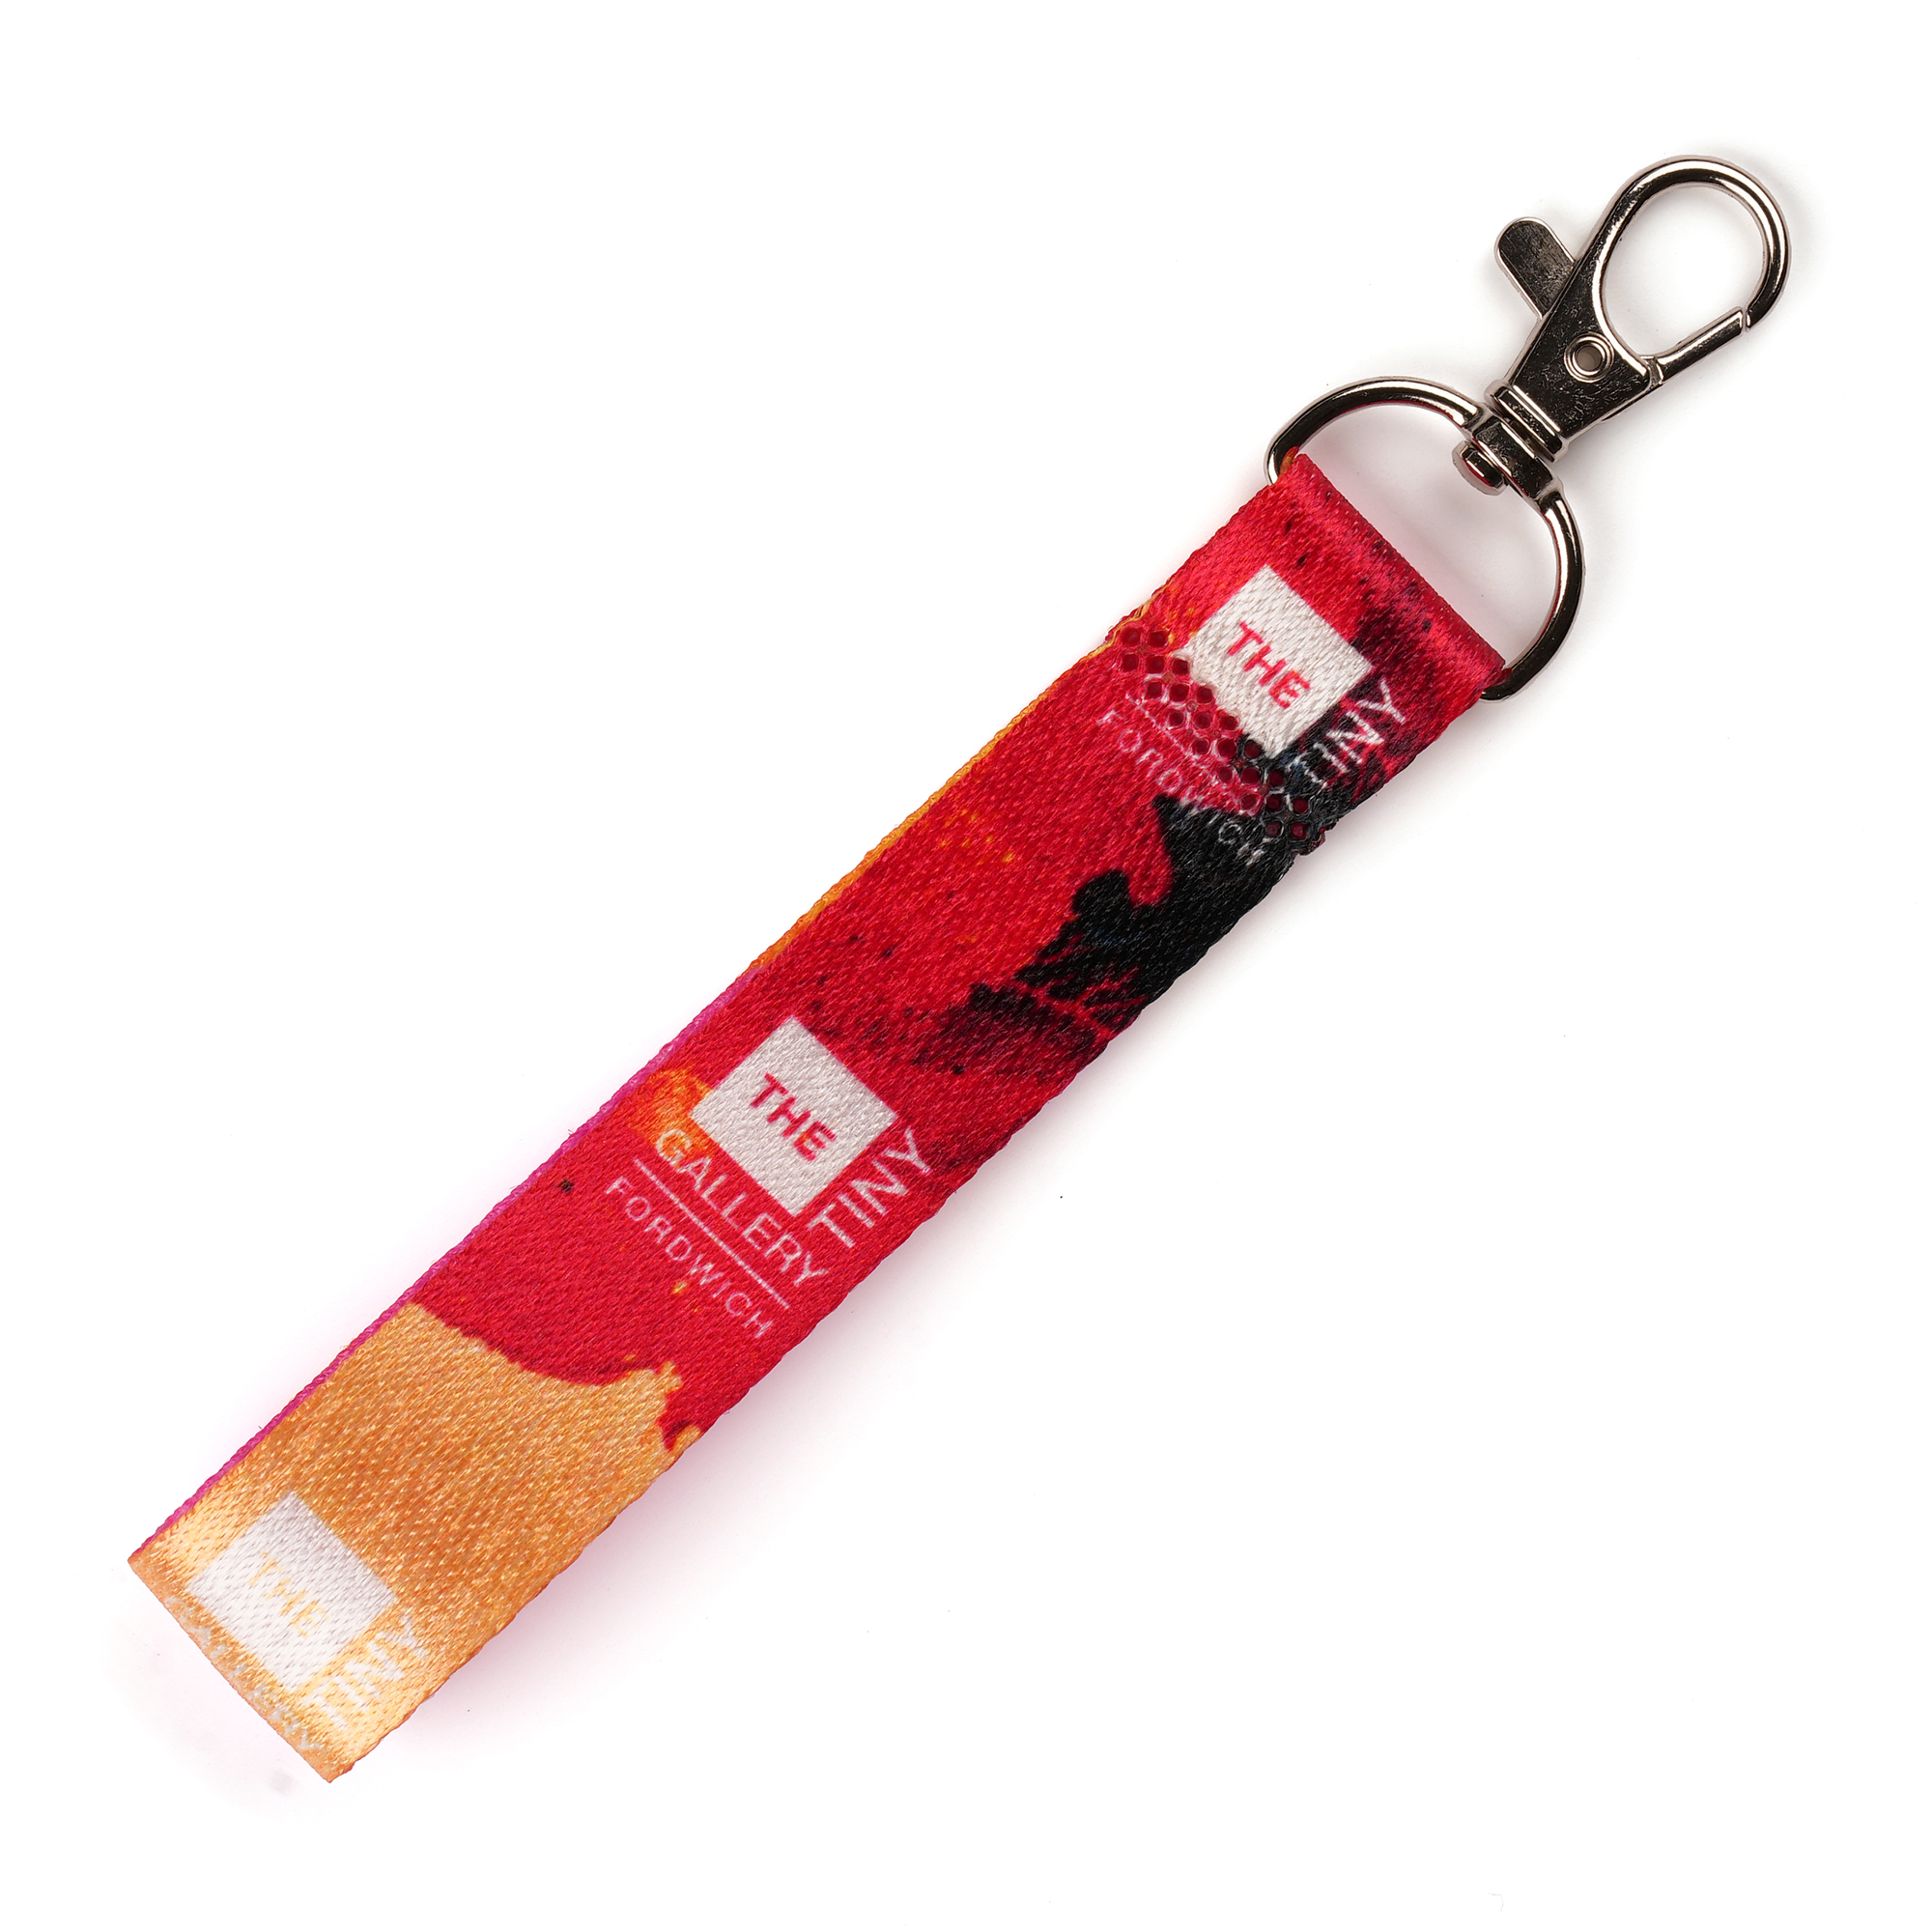 Eco-friendly RPET lanyard keyring with full colour dye sublimation to one or both sides, comes with metal clip attachment.